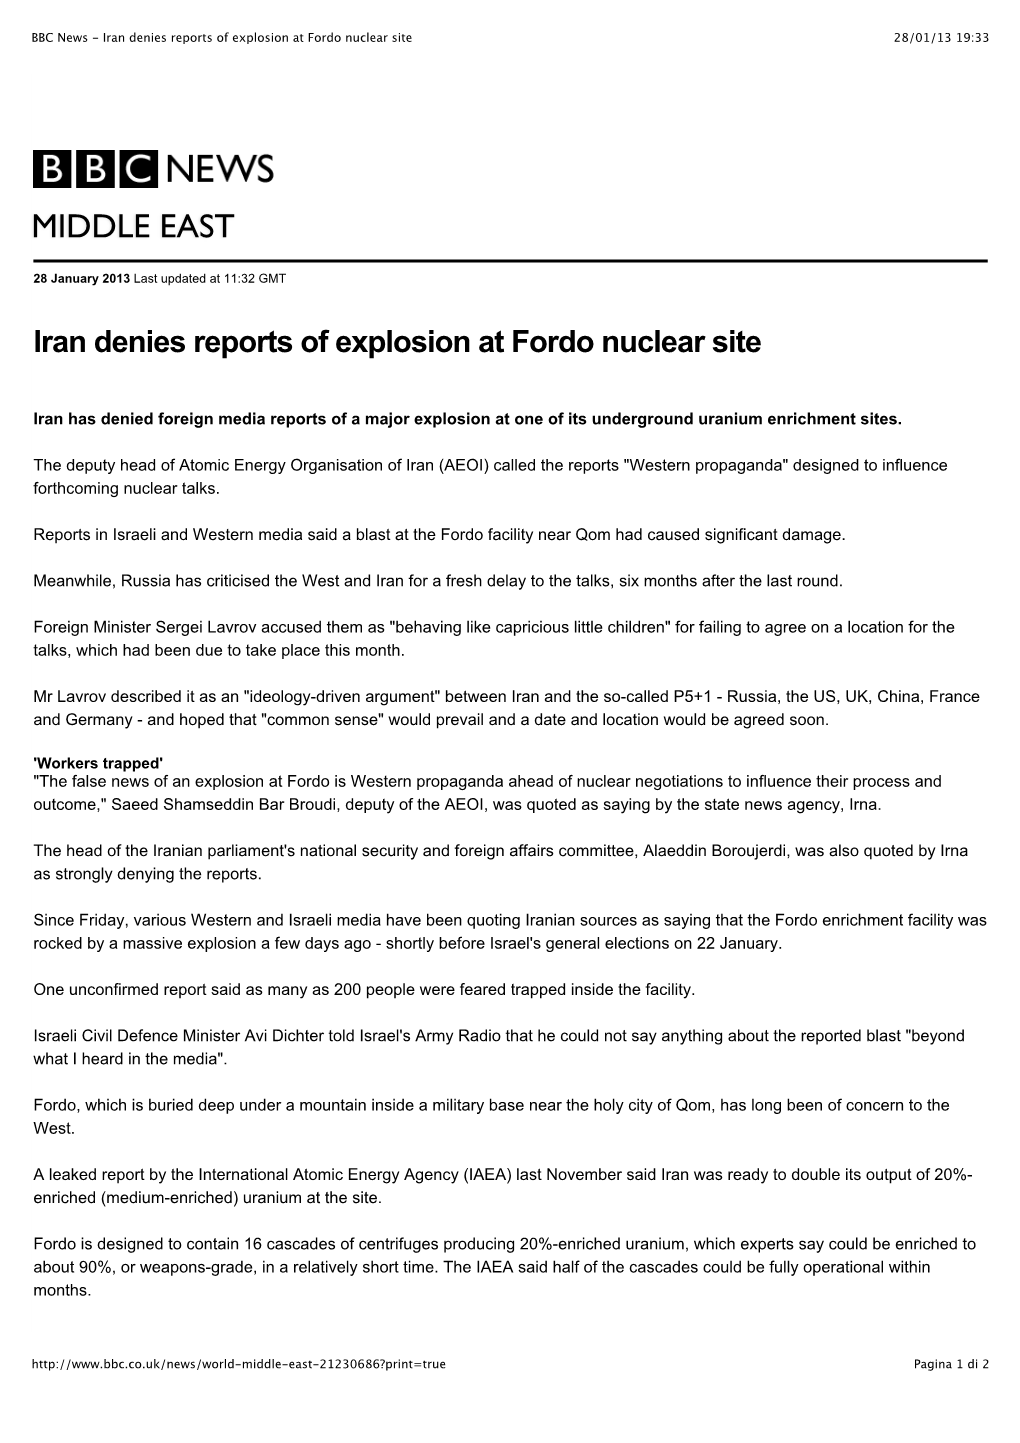 Iran Denies Reports of Explosion at Fordo Nuclear Site 28/01/13 19:33